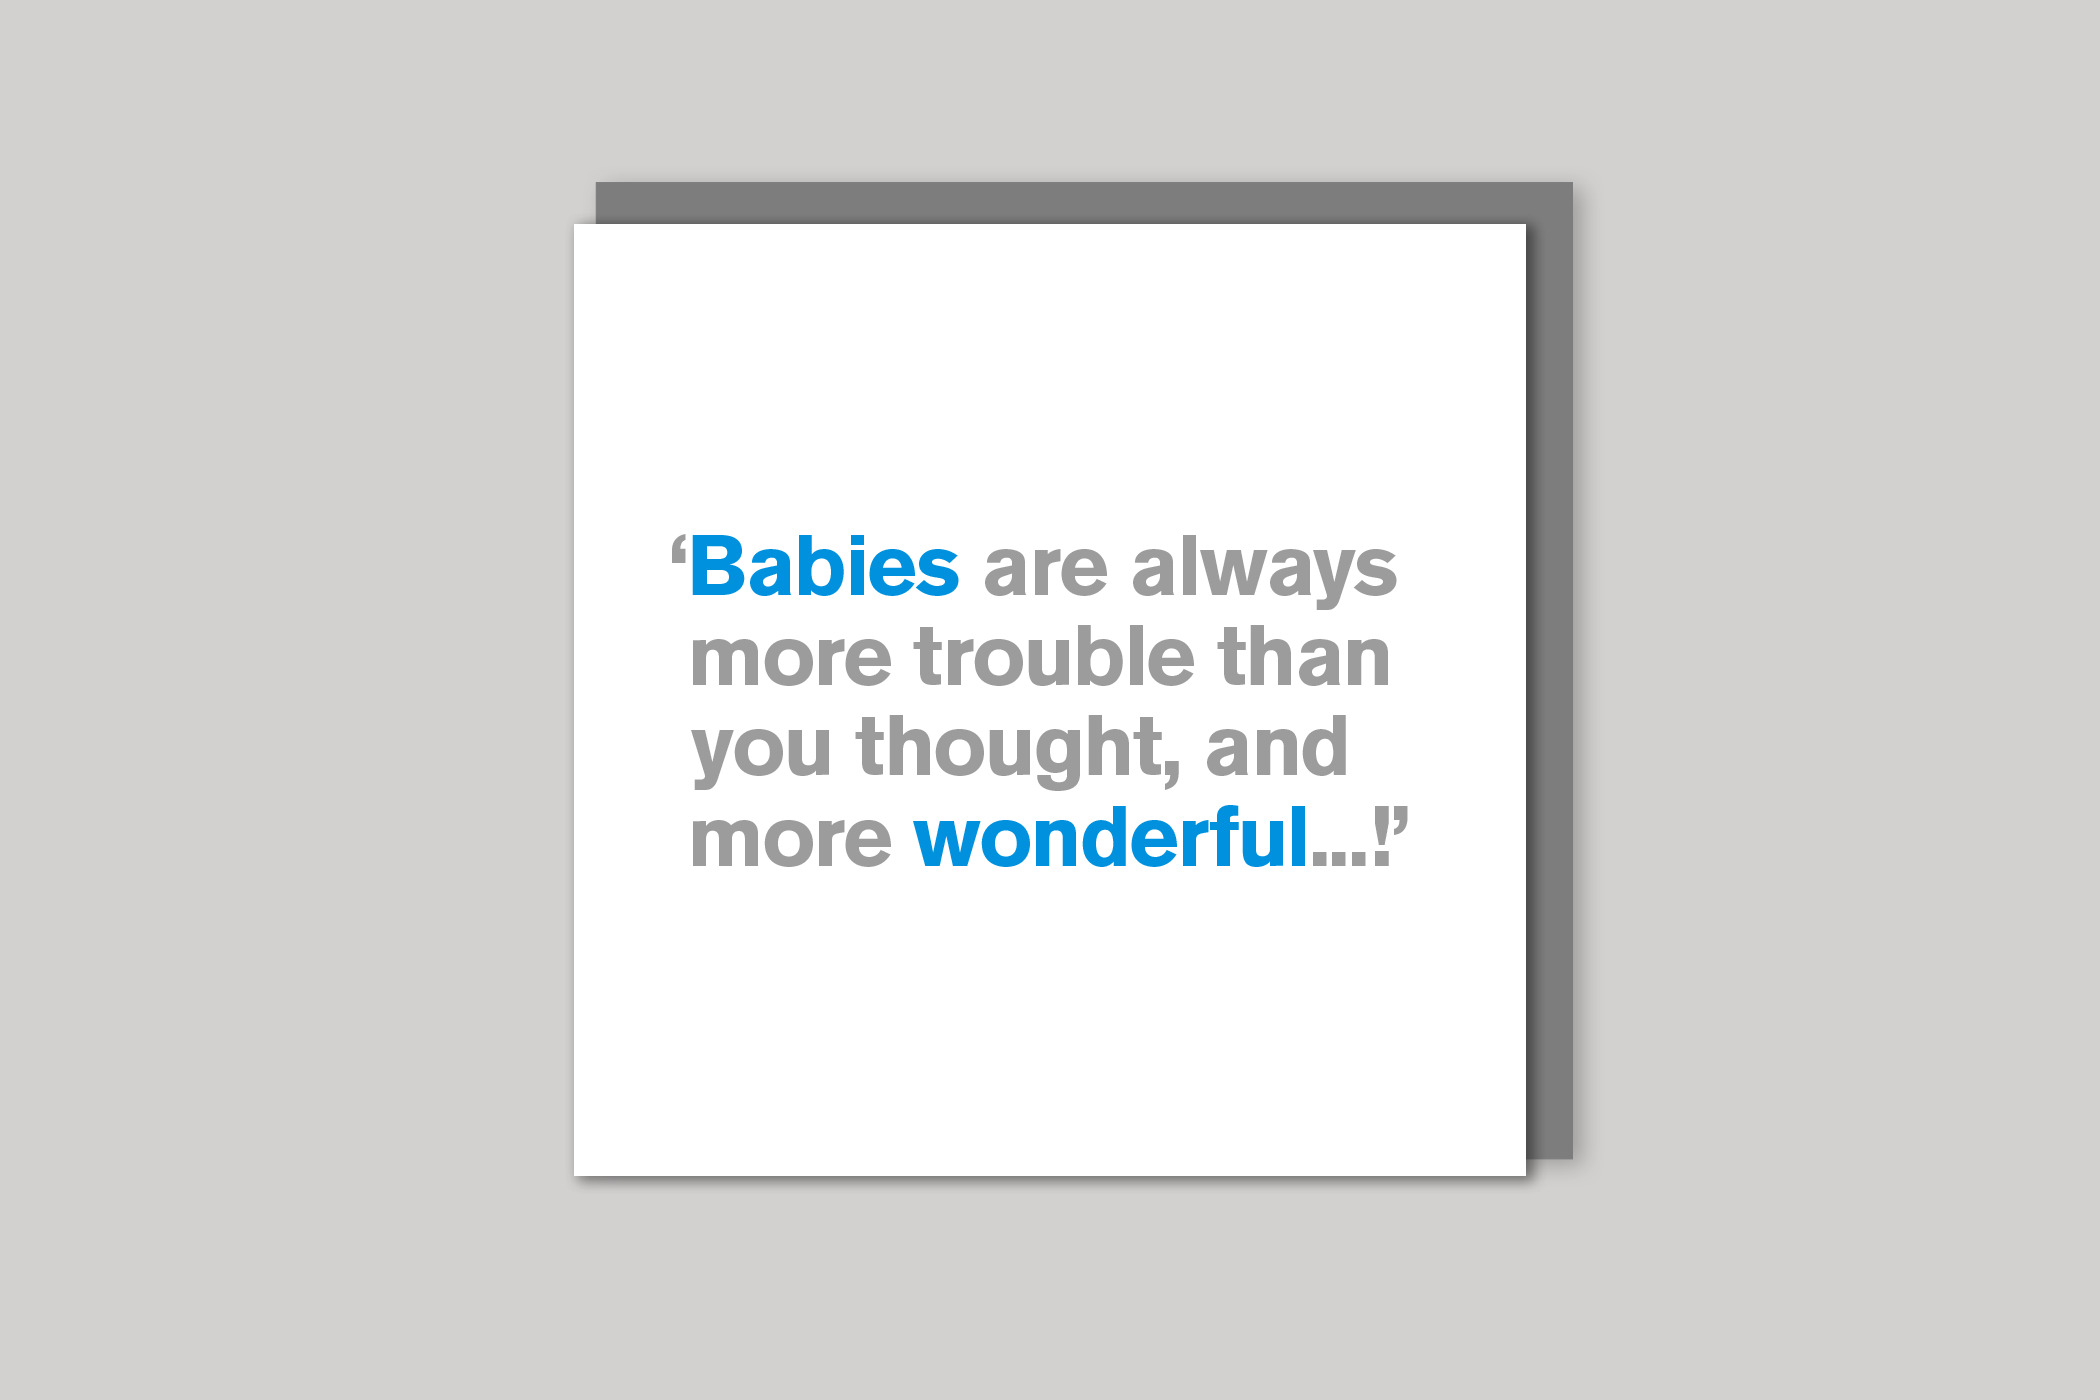 More Wonderful new baby card from Lyric range of quotation cards by Icon, back page.